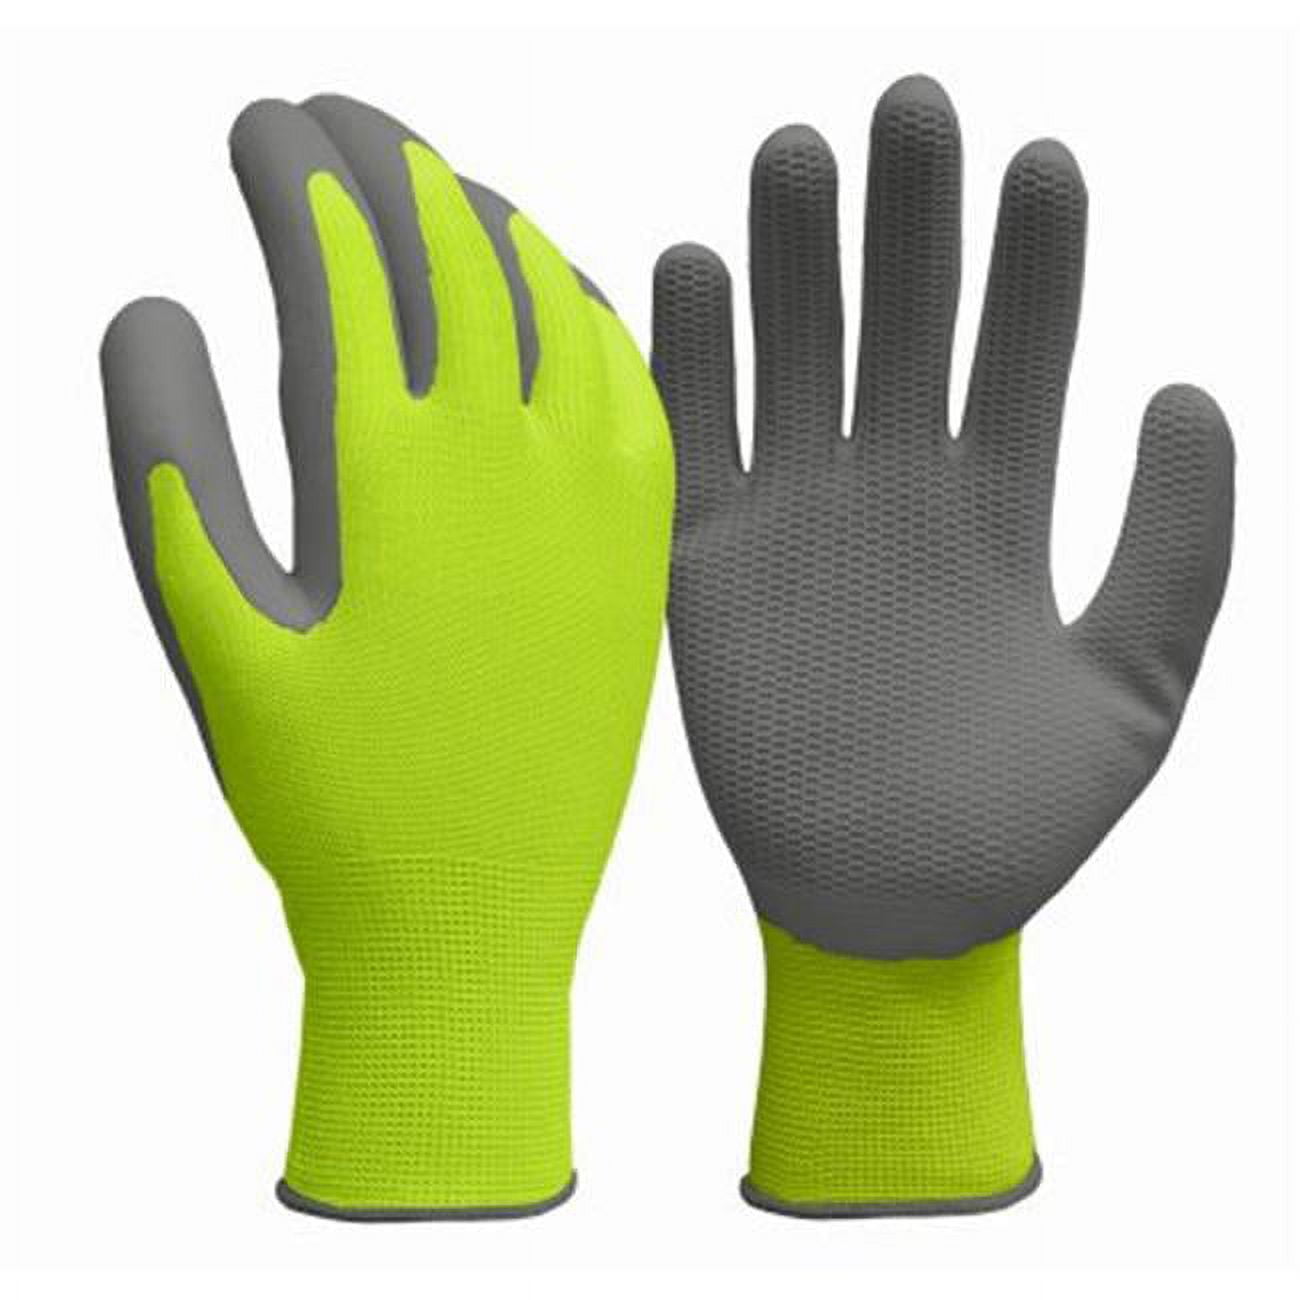 NoCry Cut Resistant Gloves with Grip Dots - High Performance Level 5 Protection, Food Grade. Size Extra Large, Free eBook Included!